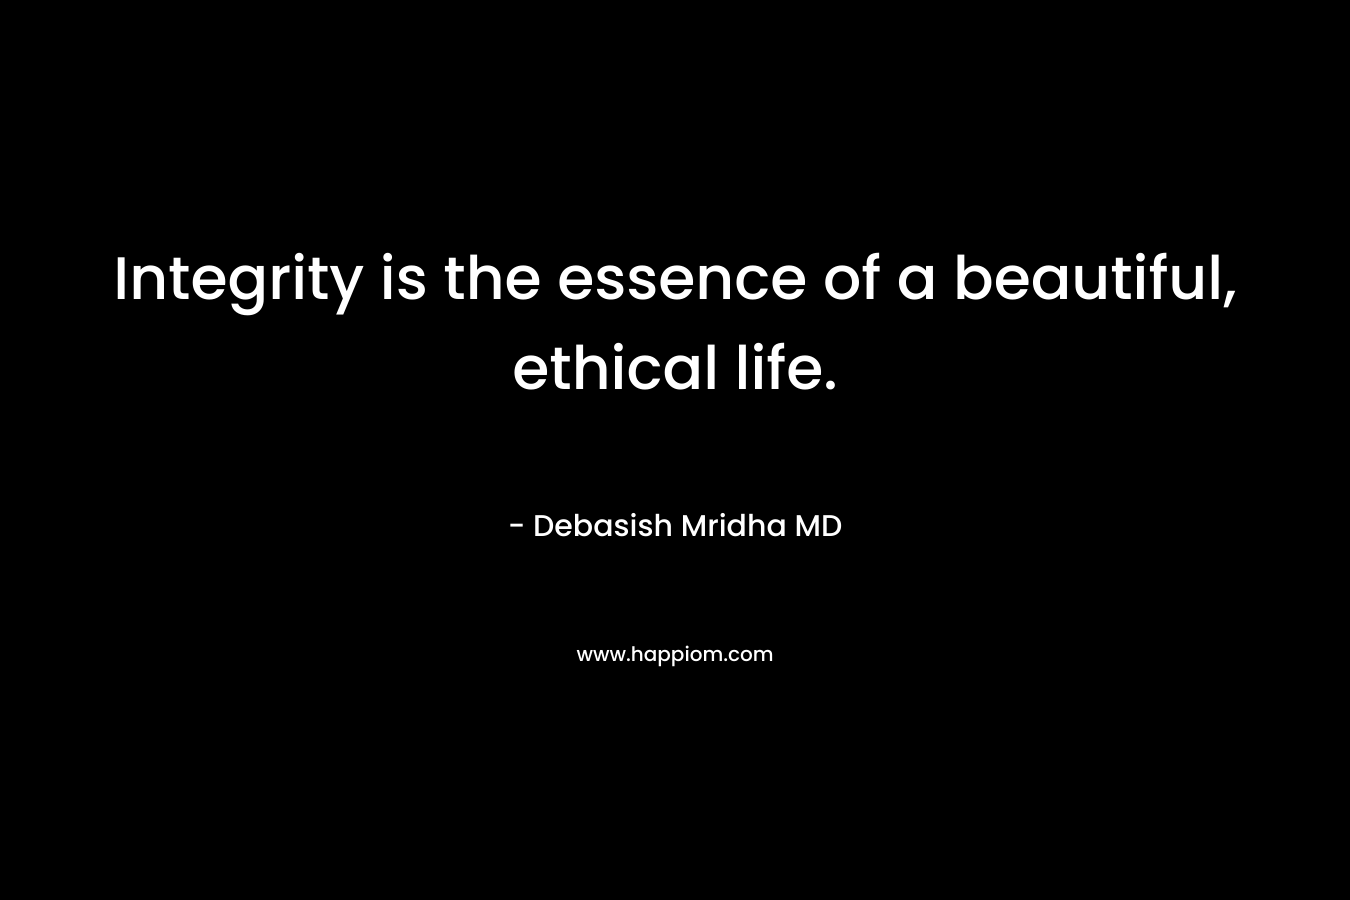 Integrity is the essence of a beautiful, ethical life.